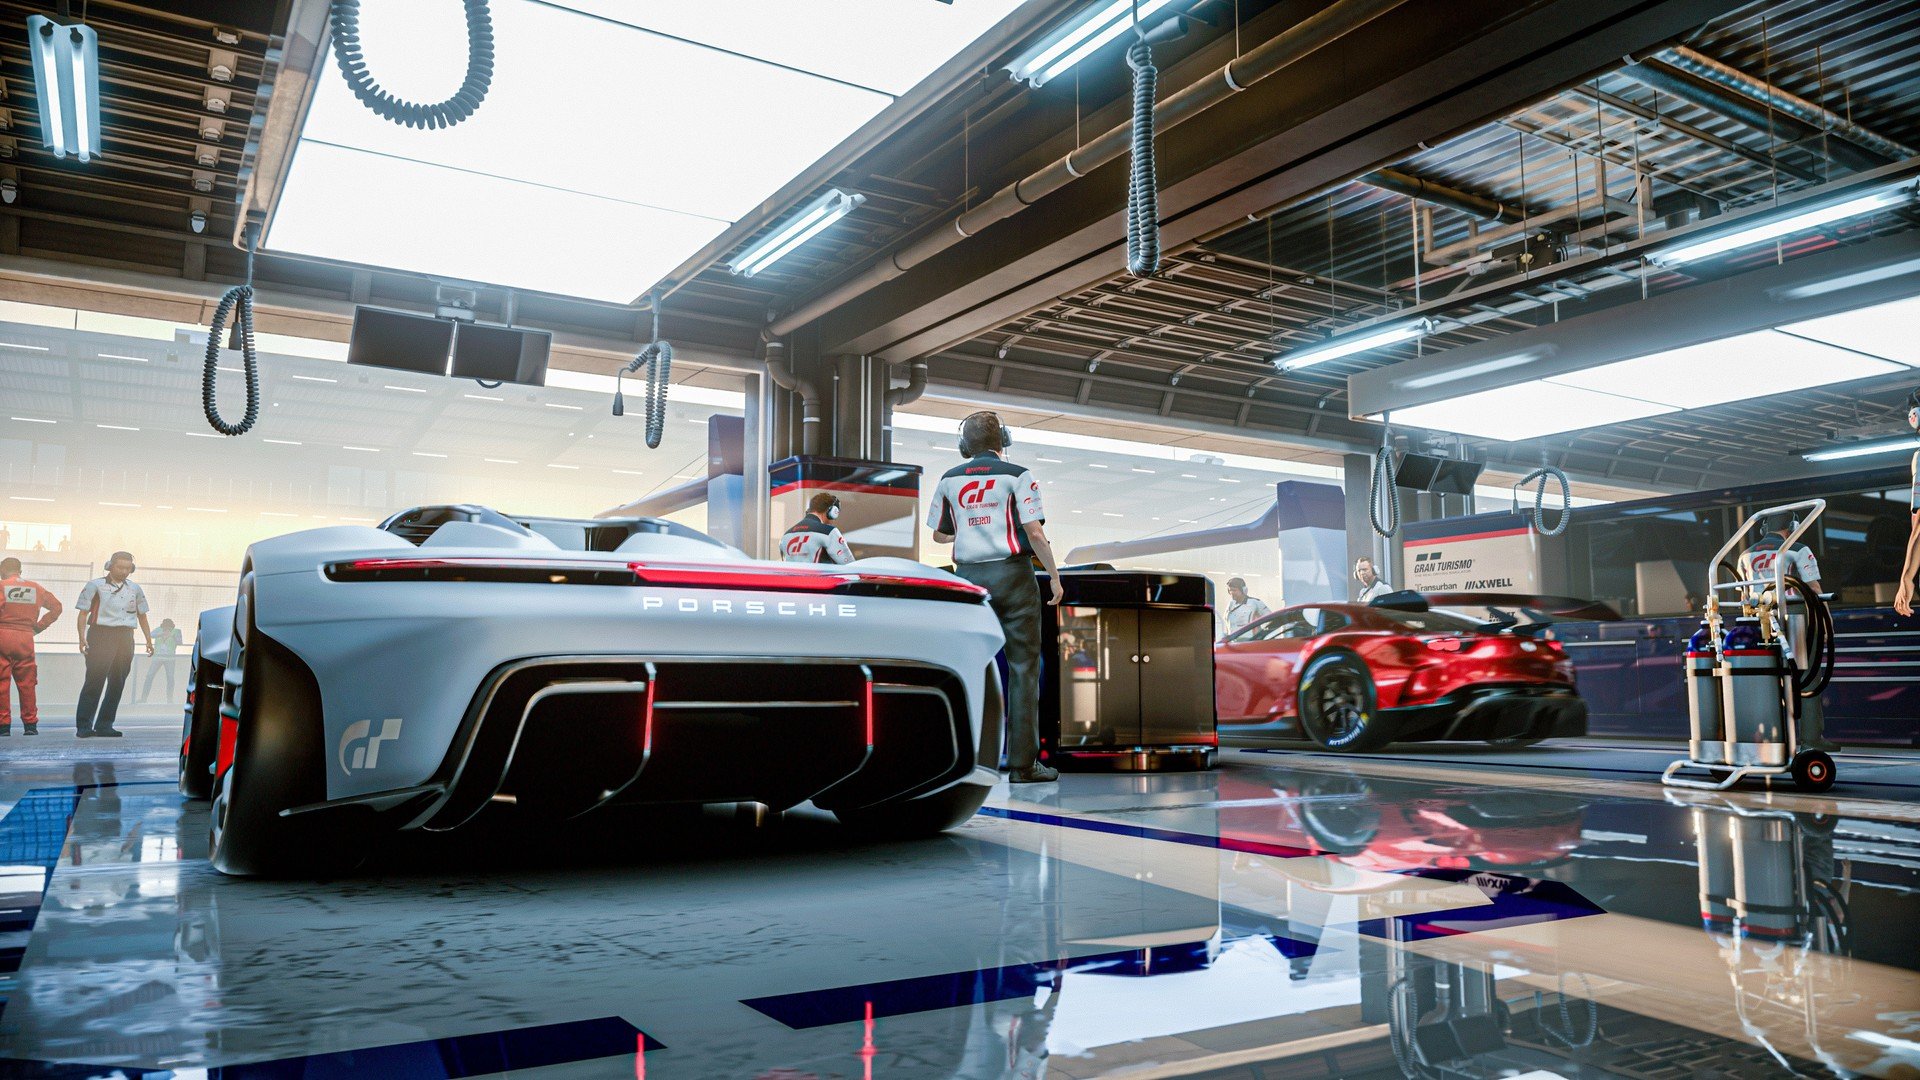 Gran Turismo 7 Receives More Details On PS5 Version Features